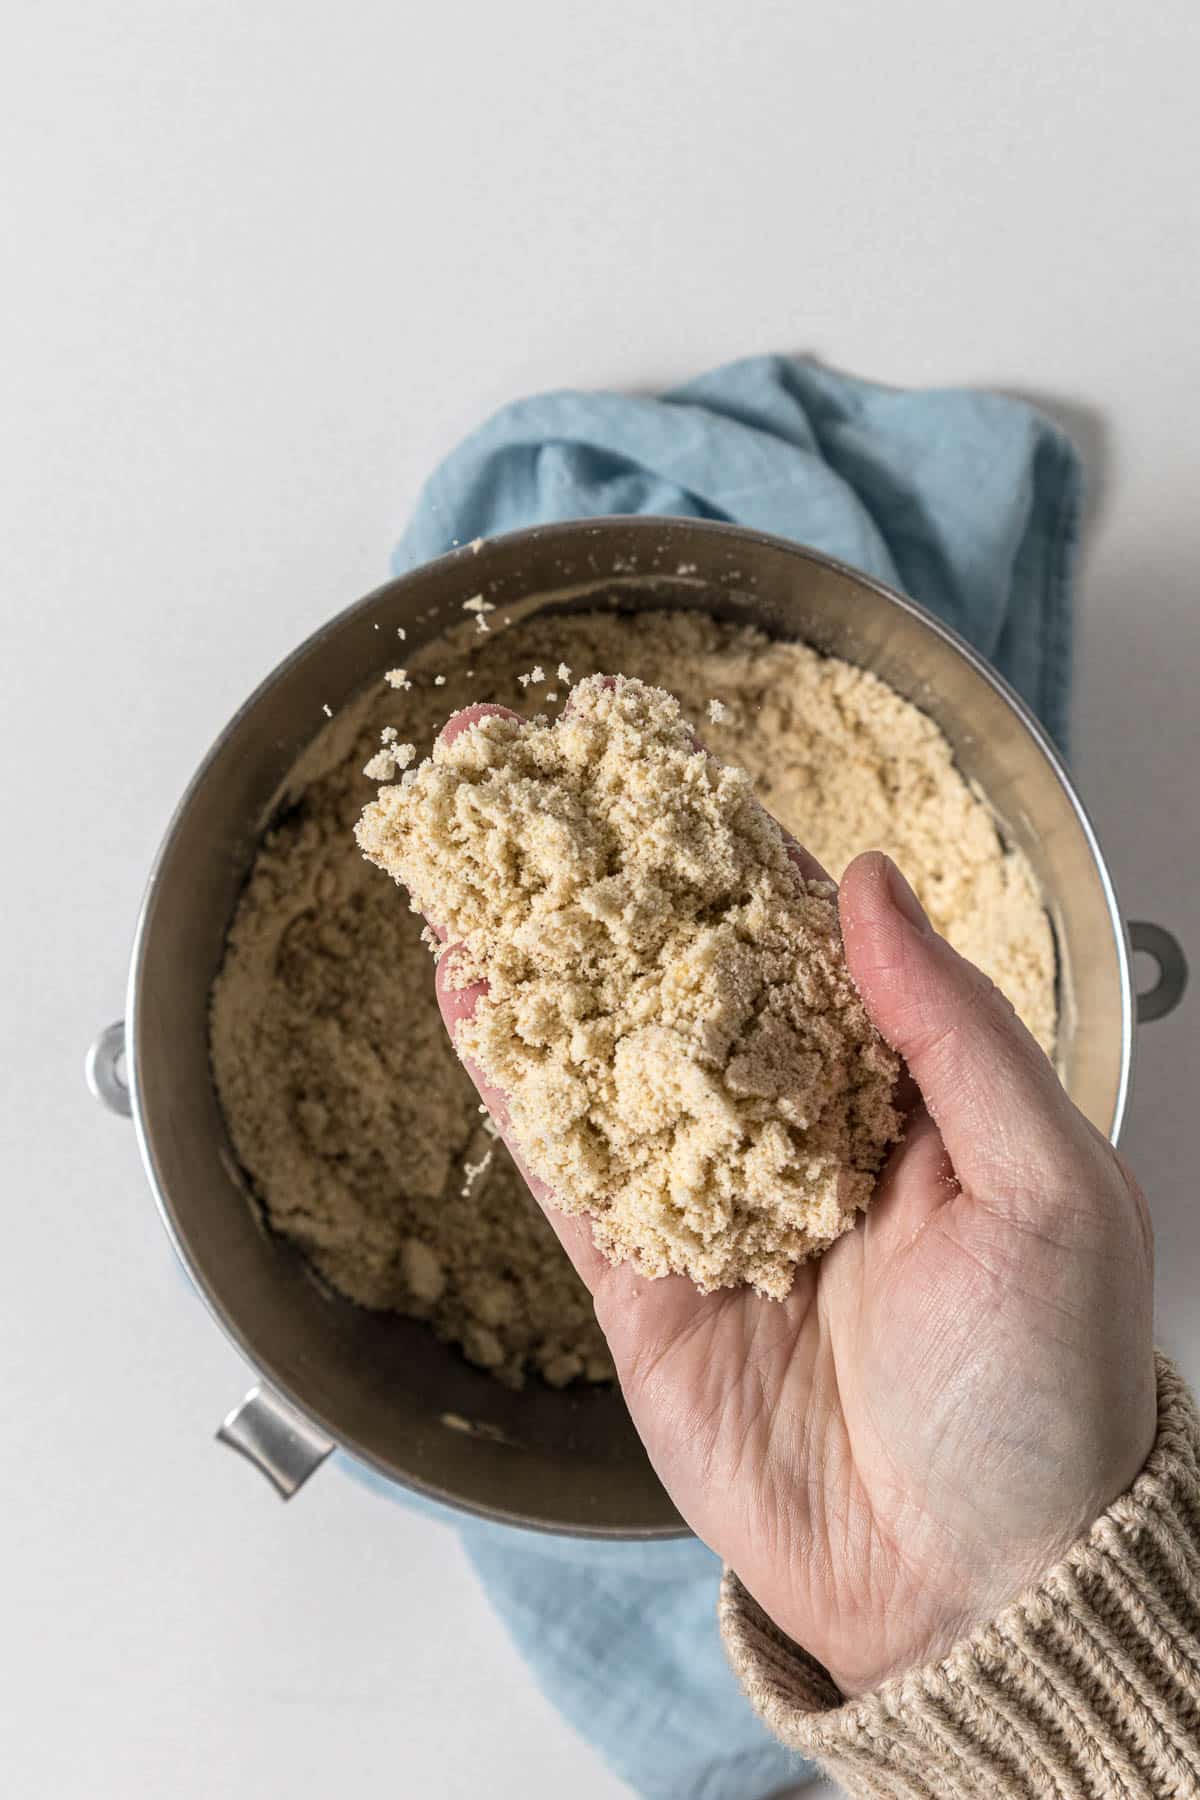 Step 2 - Hand holding up the butter-flour mixture to show the fine crumbs - wet sand texture.